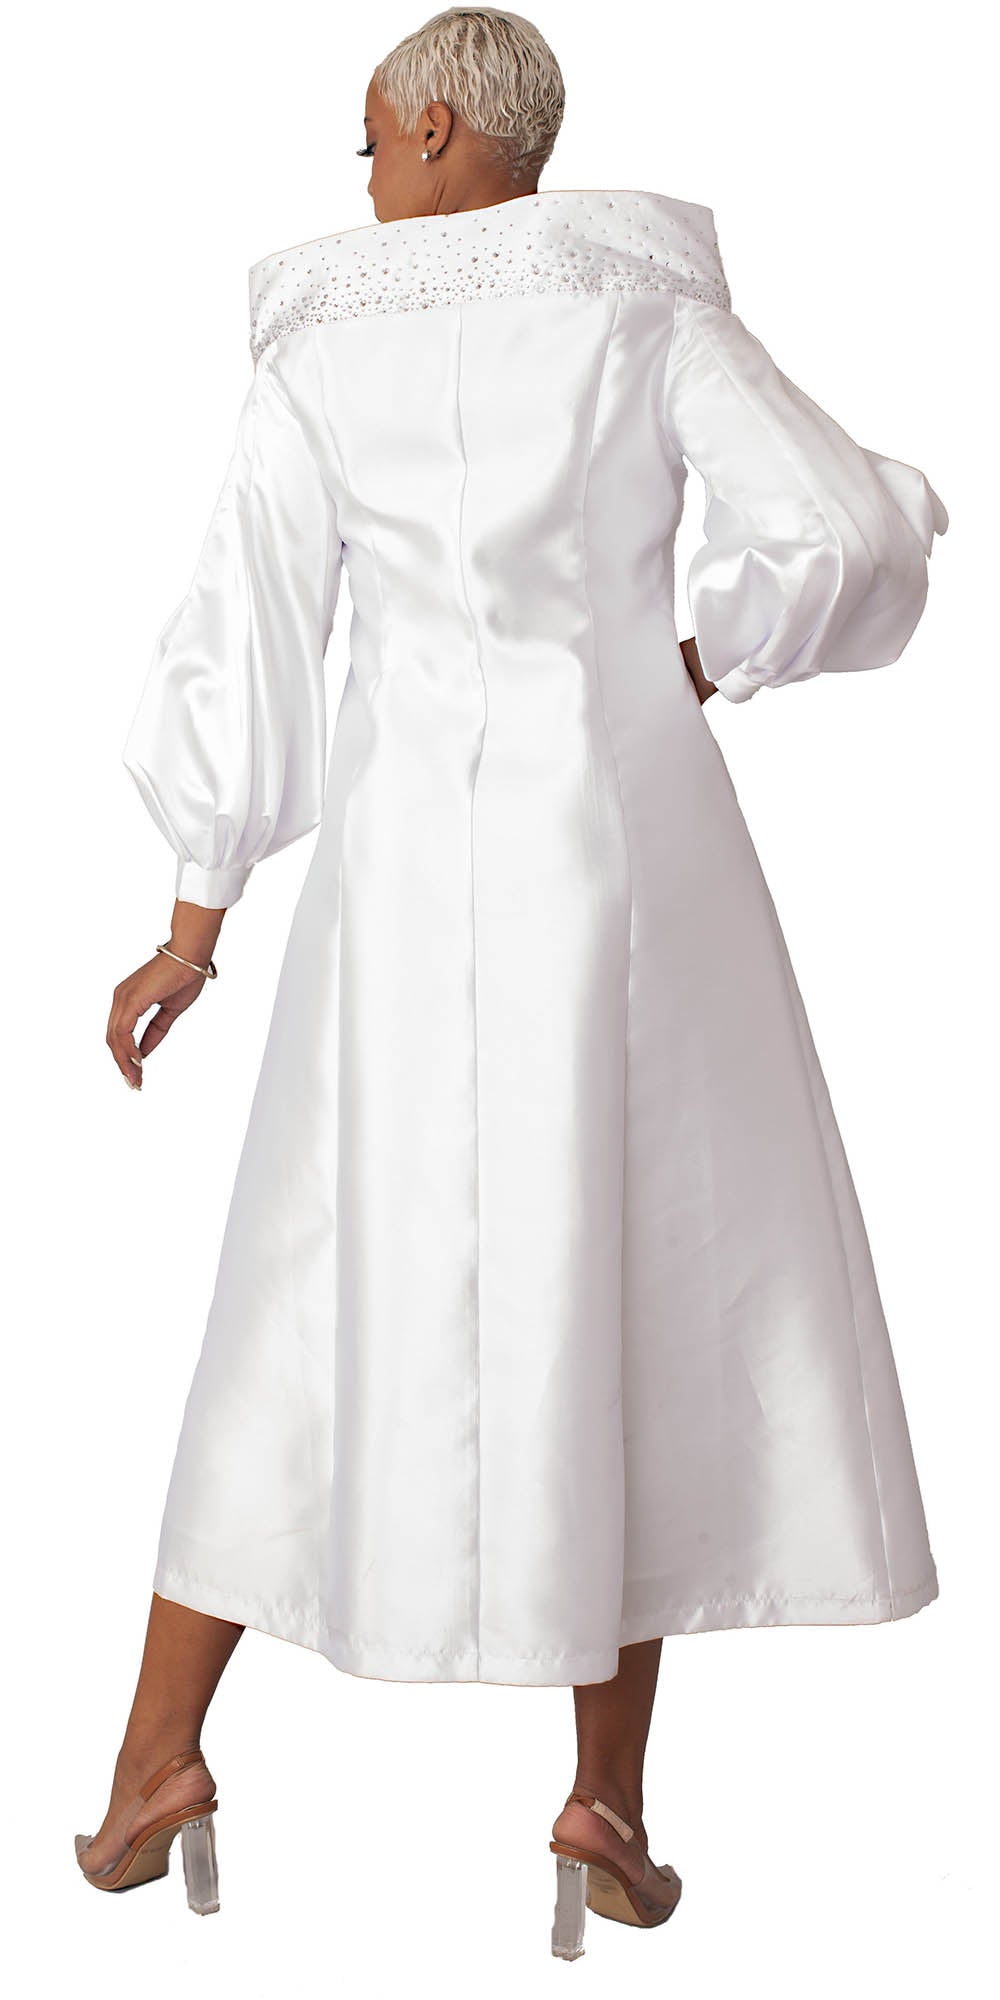 Tally Taylor - 4801 - White - Women's Clergy Robe With Bishop Sleeves and Portrait Collar